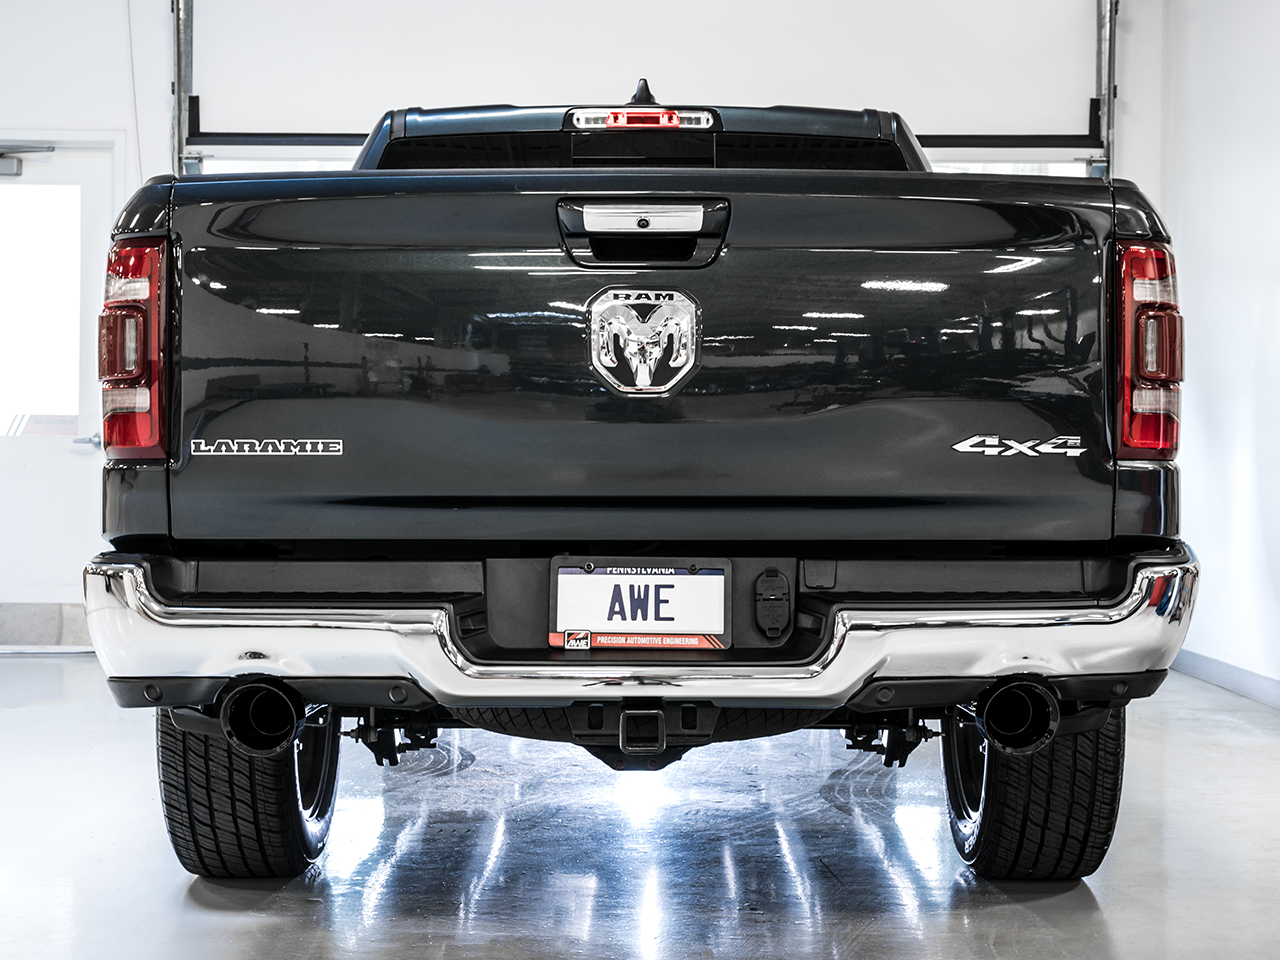 AWE 0FG Dual Rear Exit Catback Exhaust for 5th Gen RAM 1500 5.7L (with bumper cutouts) - Diamond Black Tips (3015-33006)